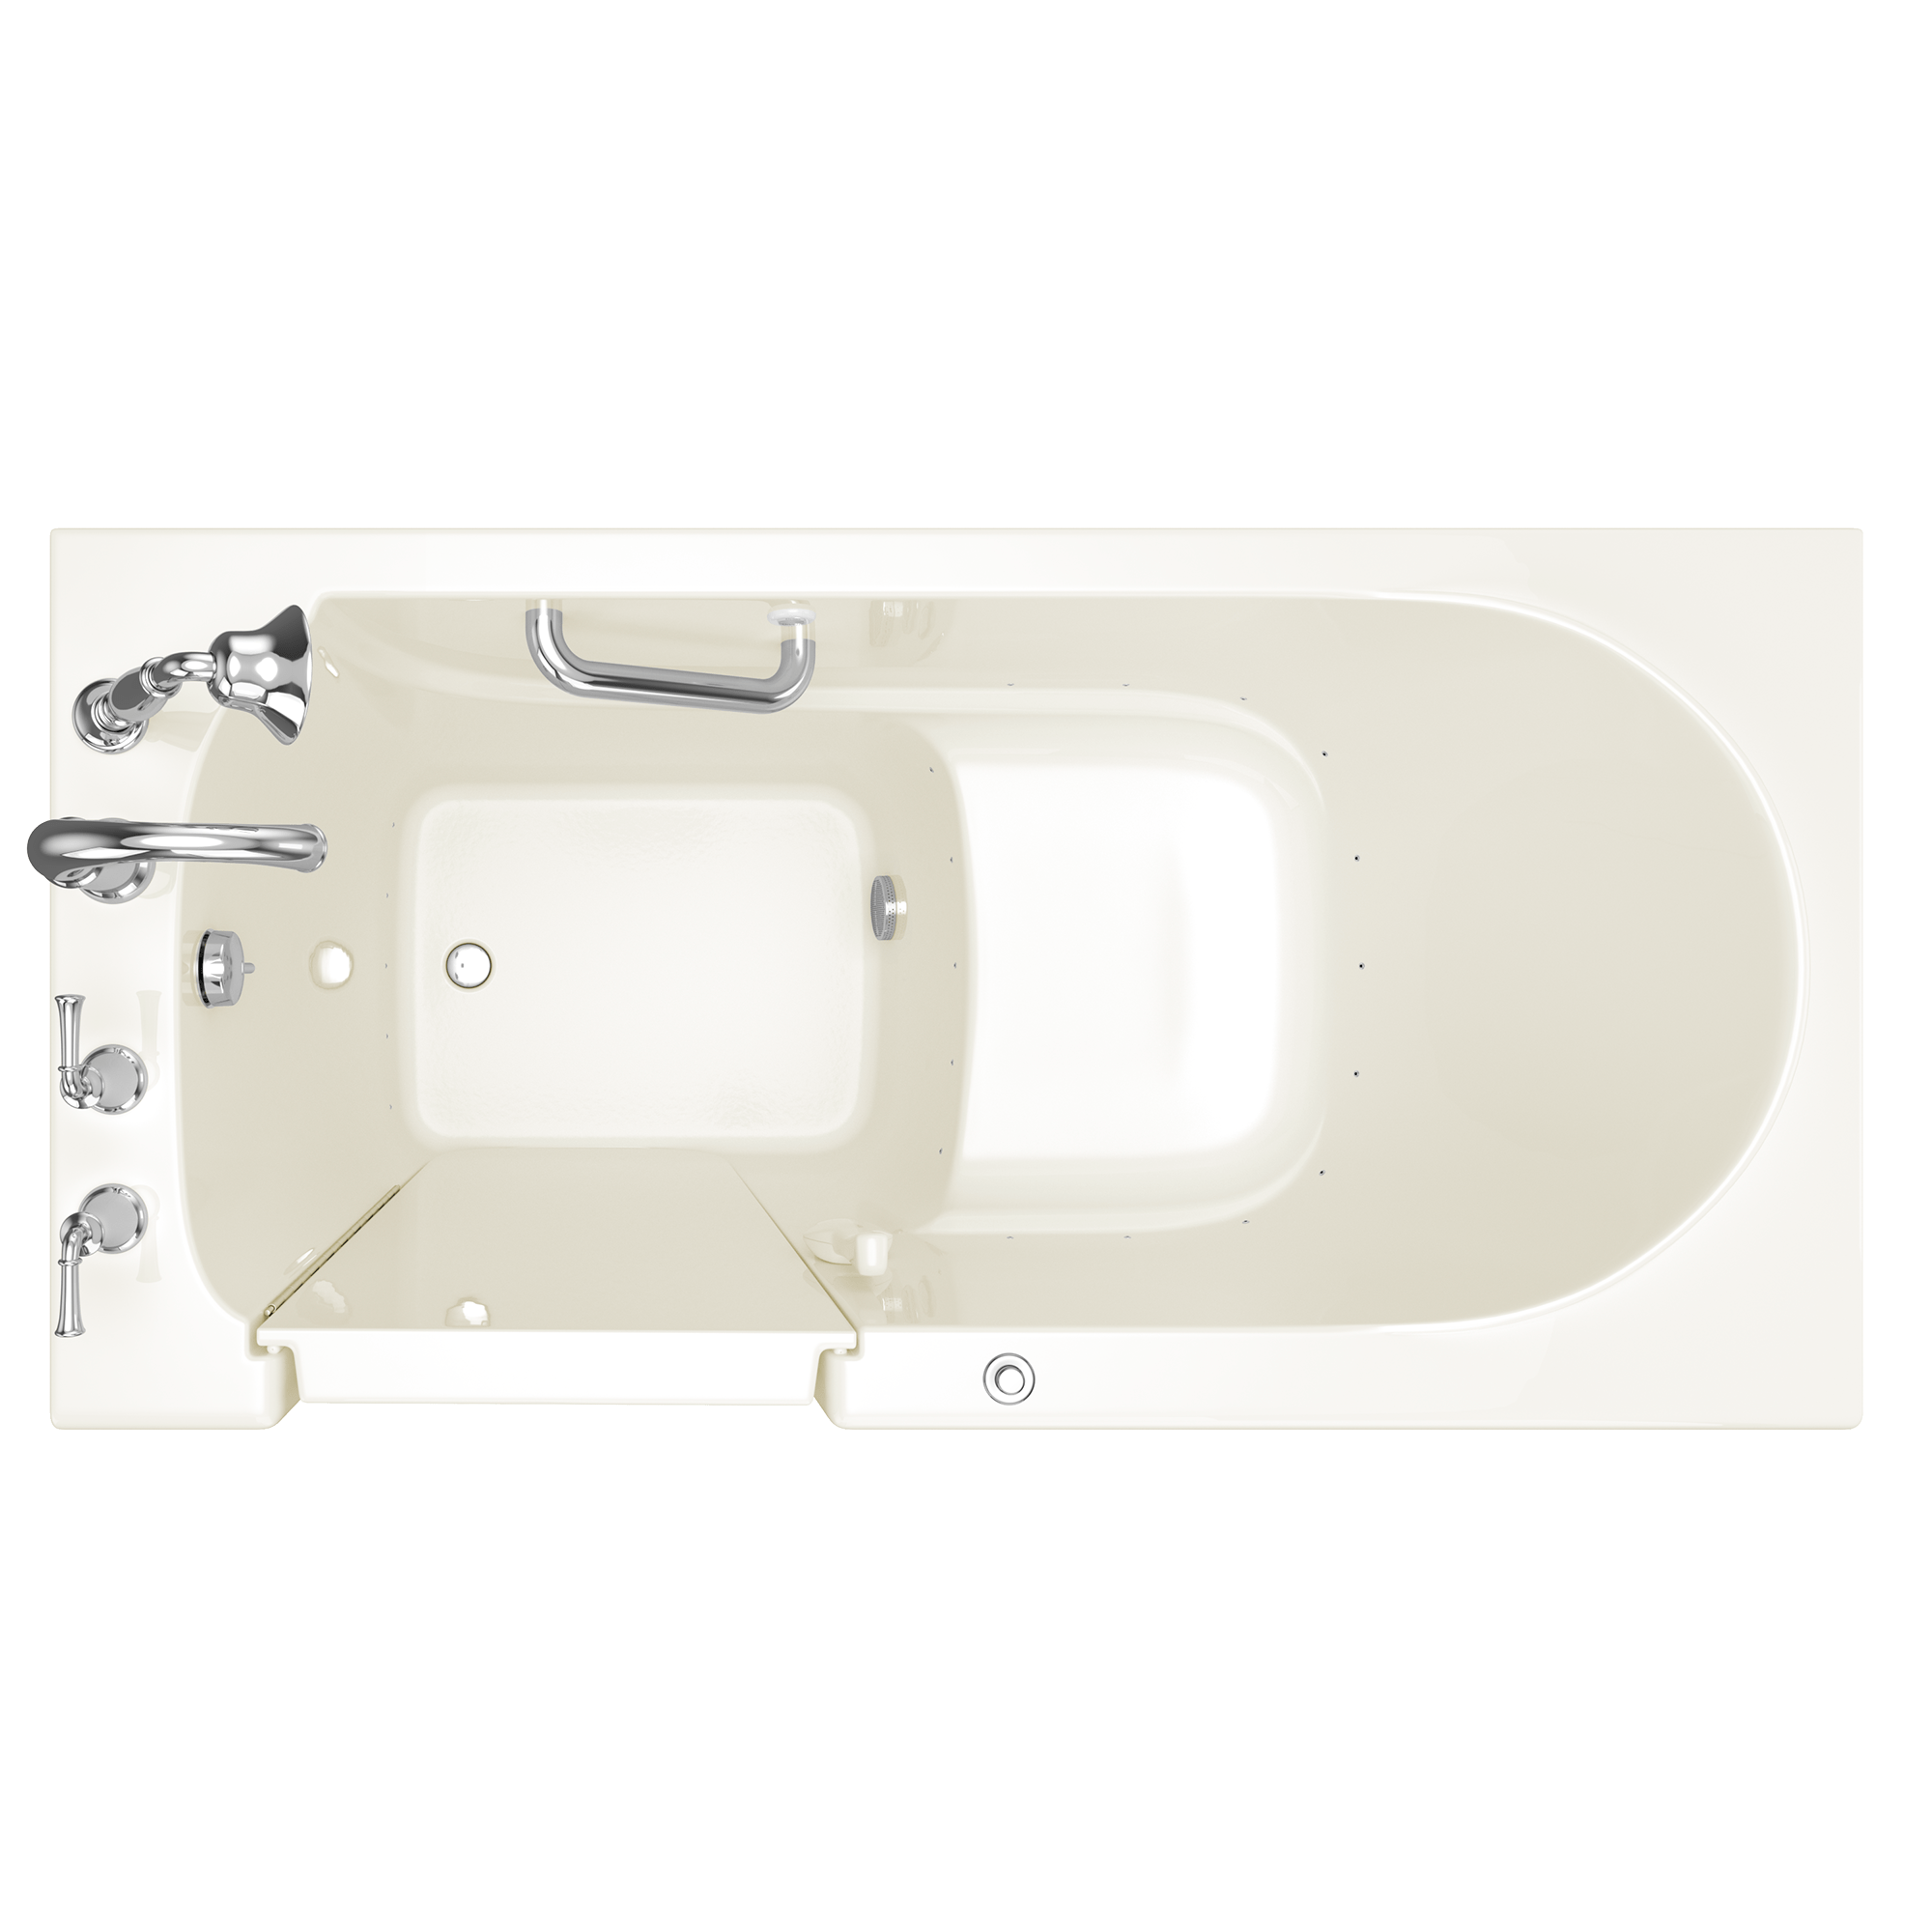 Gelcoat Value Series 30x60 Inch Walk-In Bathtub with Air Spa System - Left Hand Door and Drain